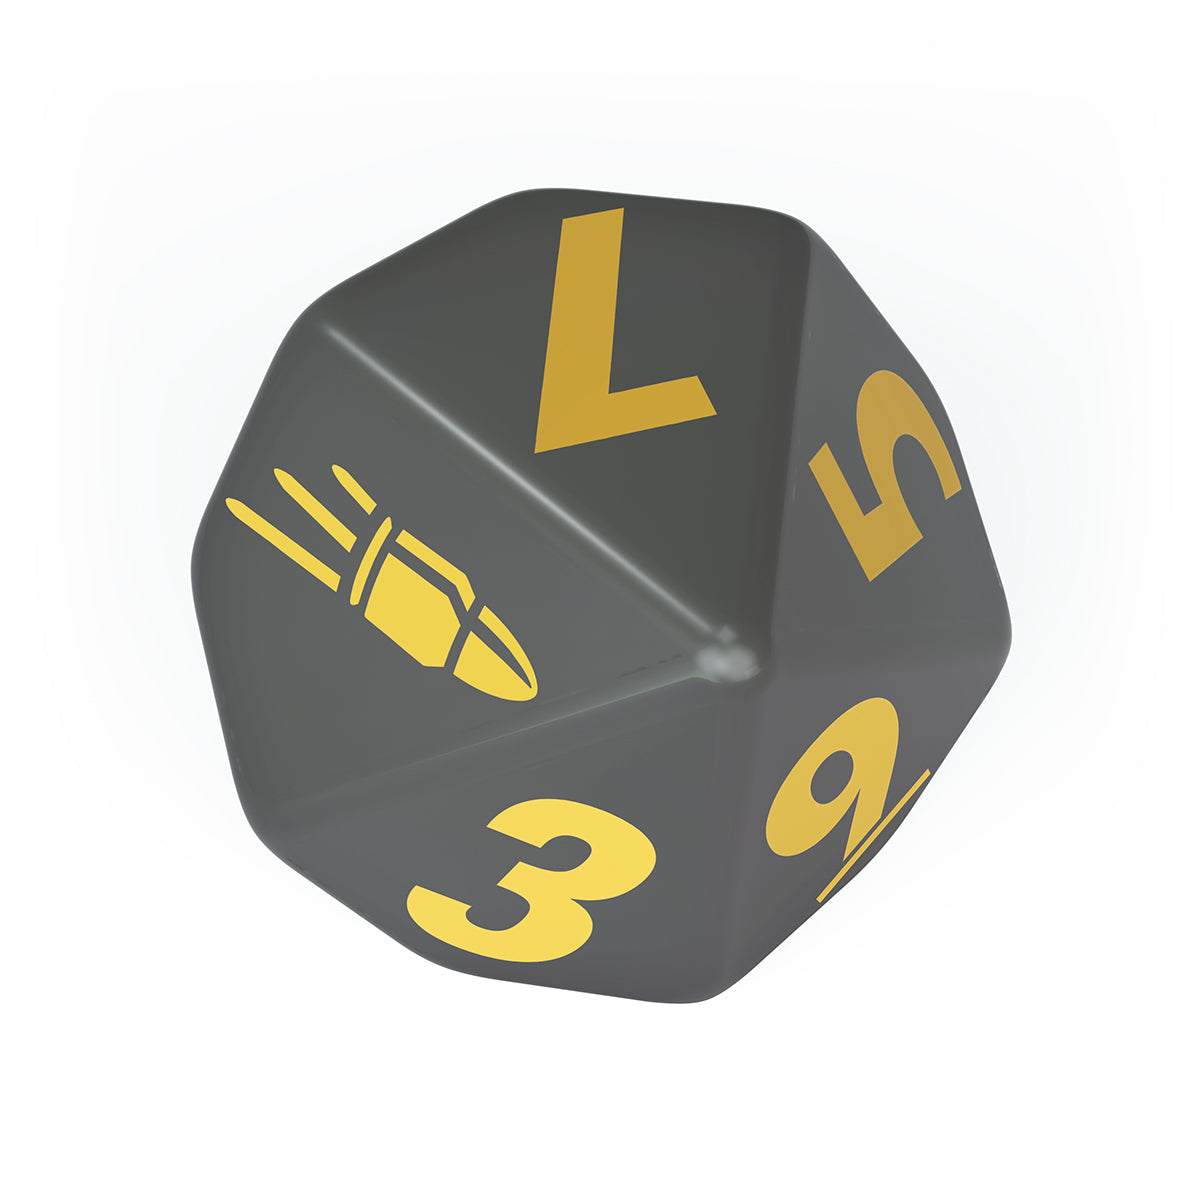 Factions Dice Sets: The Operators